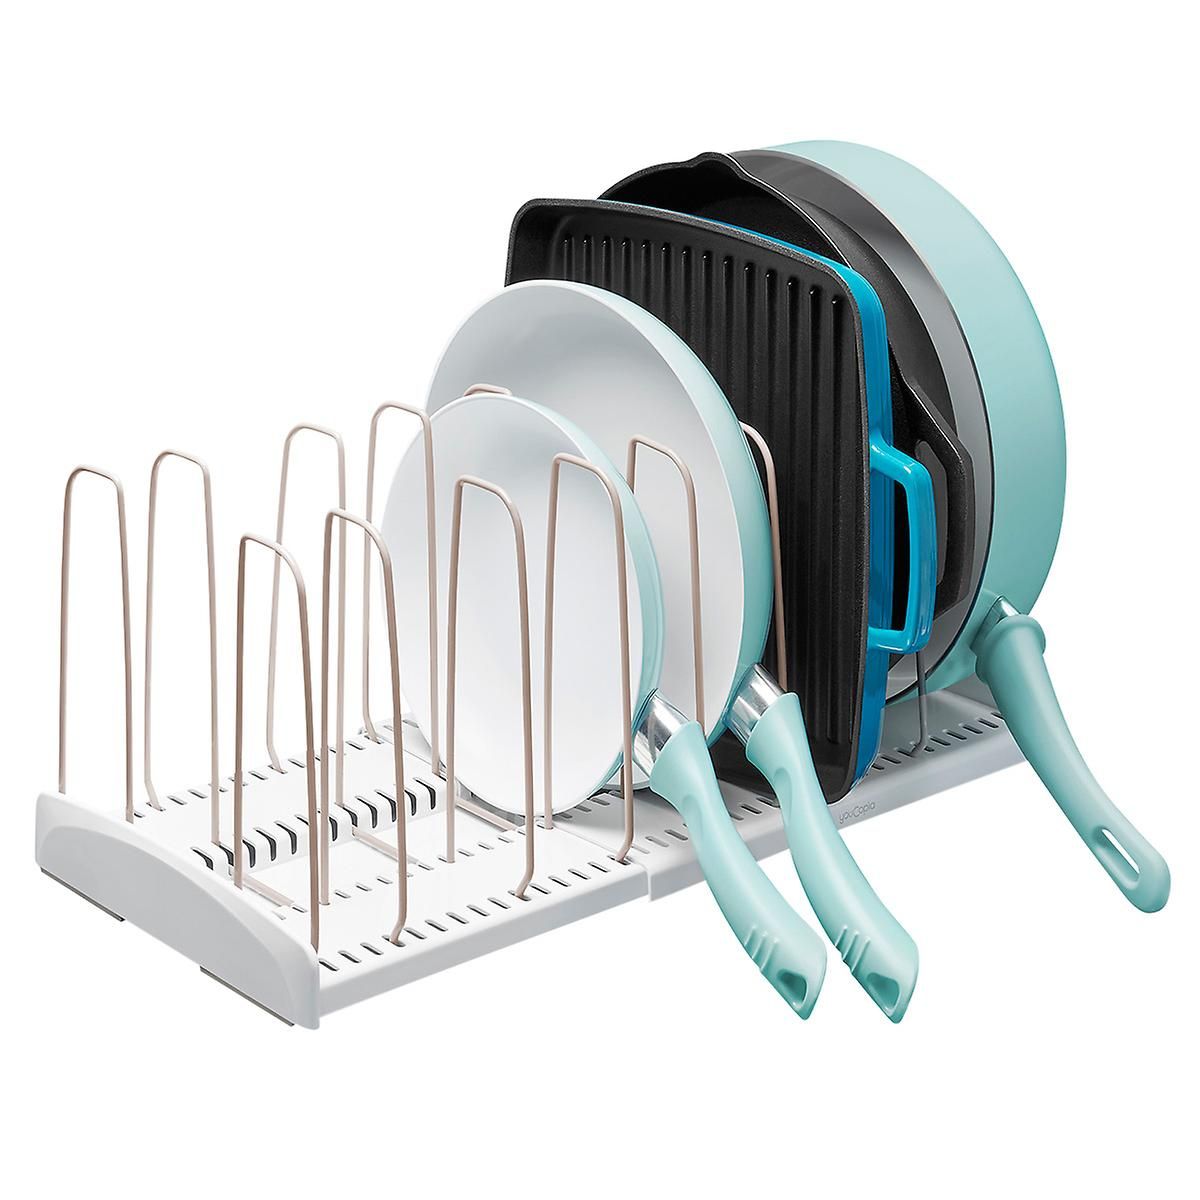 YouCopia StoreMore Expandable Cookware Rack | The Container Store